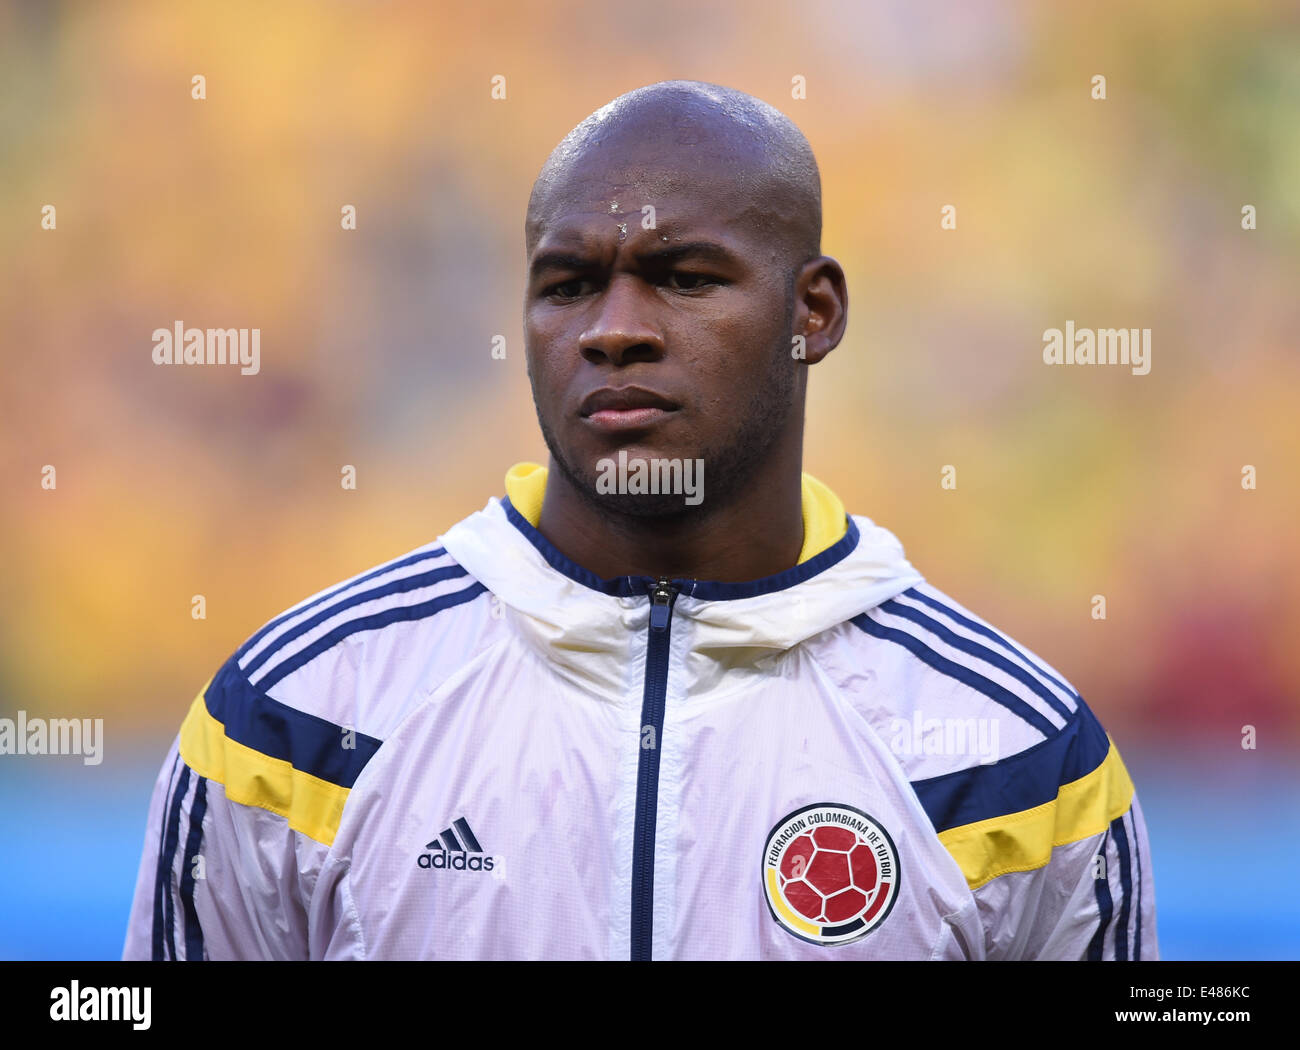 Fortaleza, Brazil. 04th July, 2014. Victor Ibarbo of Colombia seen during the FIFA World Cup 2014 quarter final match soccer between Brazil and Colombia at the Estadio Castelao in Fortaleza, Brazil, 04 July 2014. Photo: Marius Becker/dpa/Alamy Live News Stock Photo